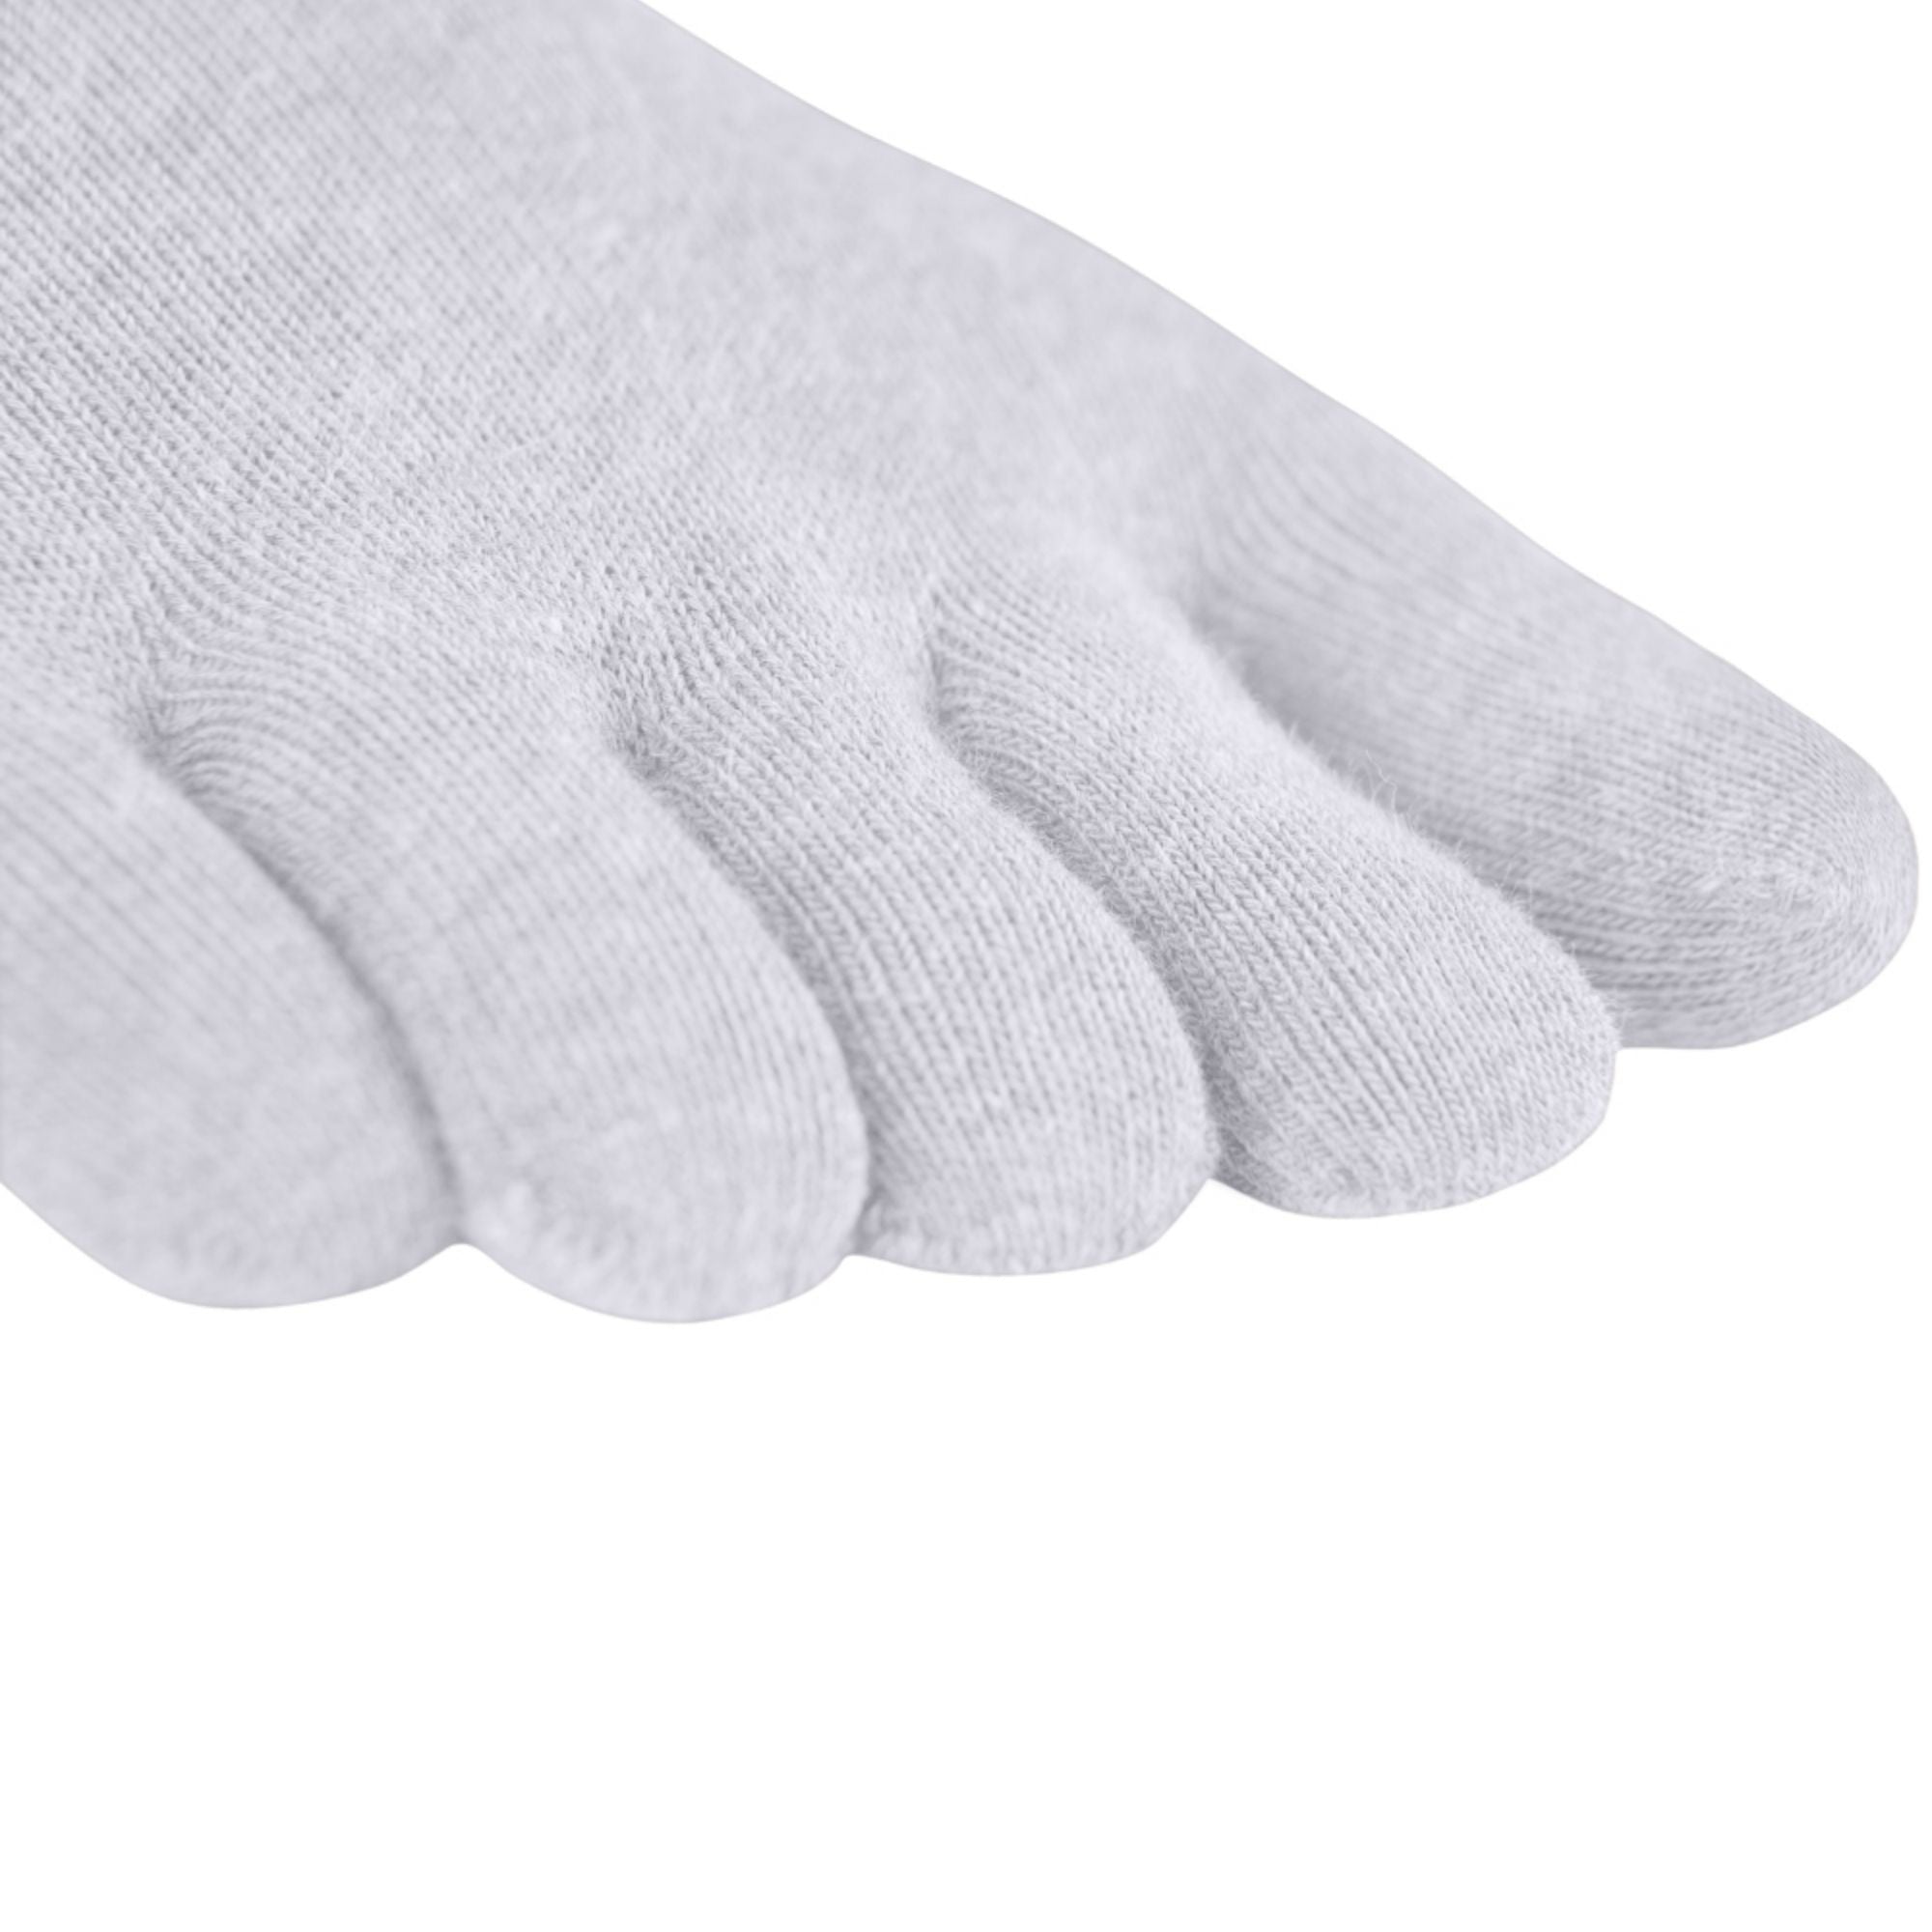 3-pack sports toe socks from Coolmax and cotton from Knitido in white